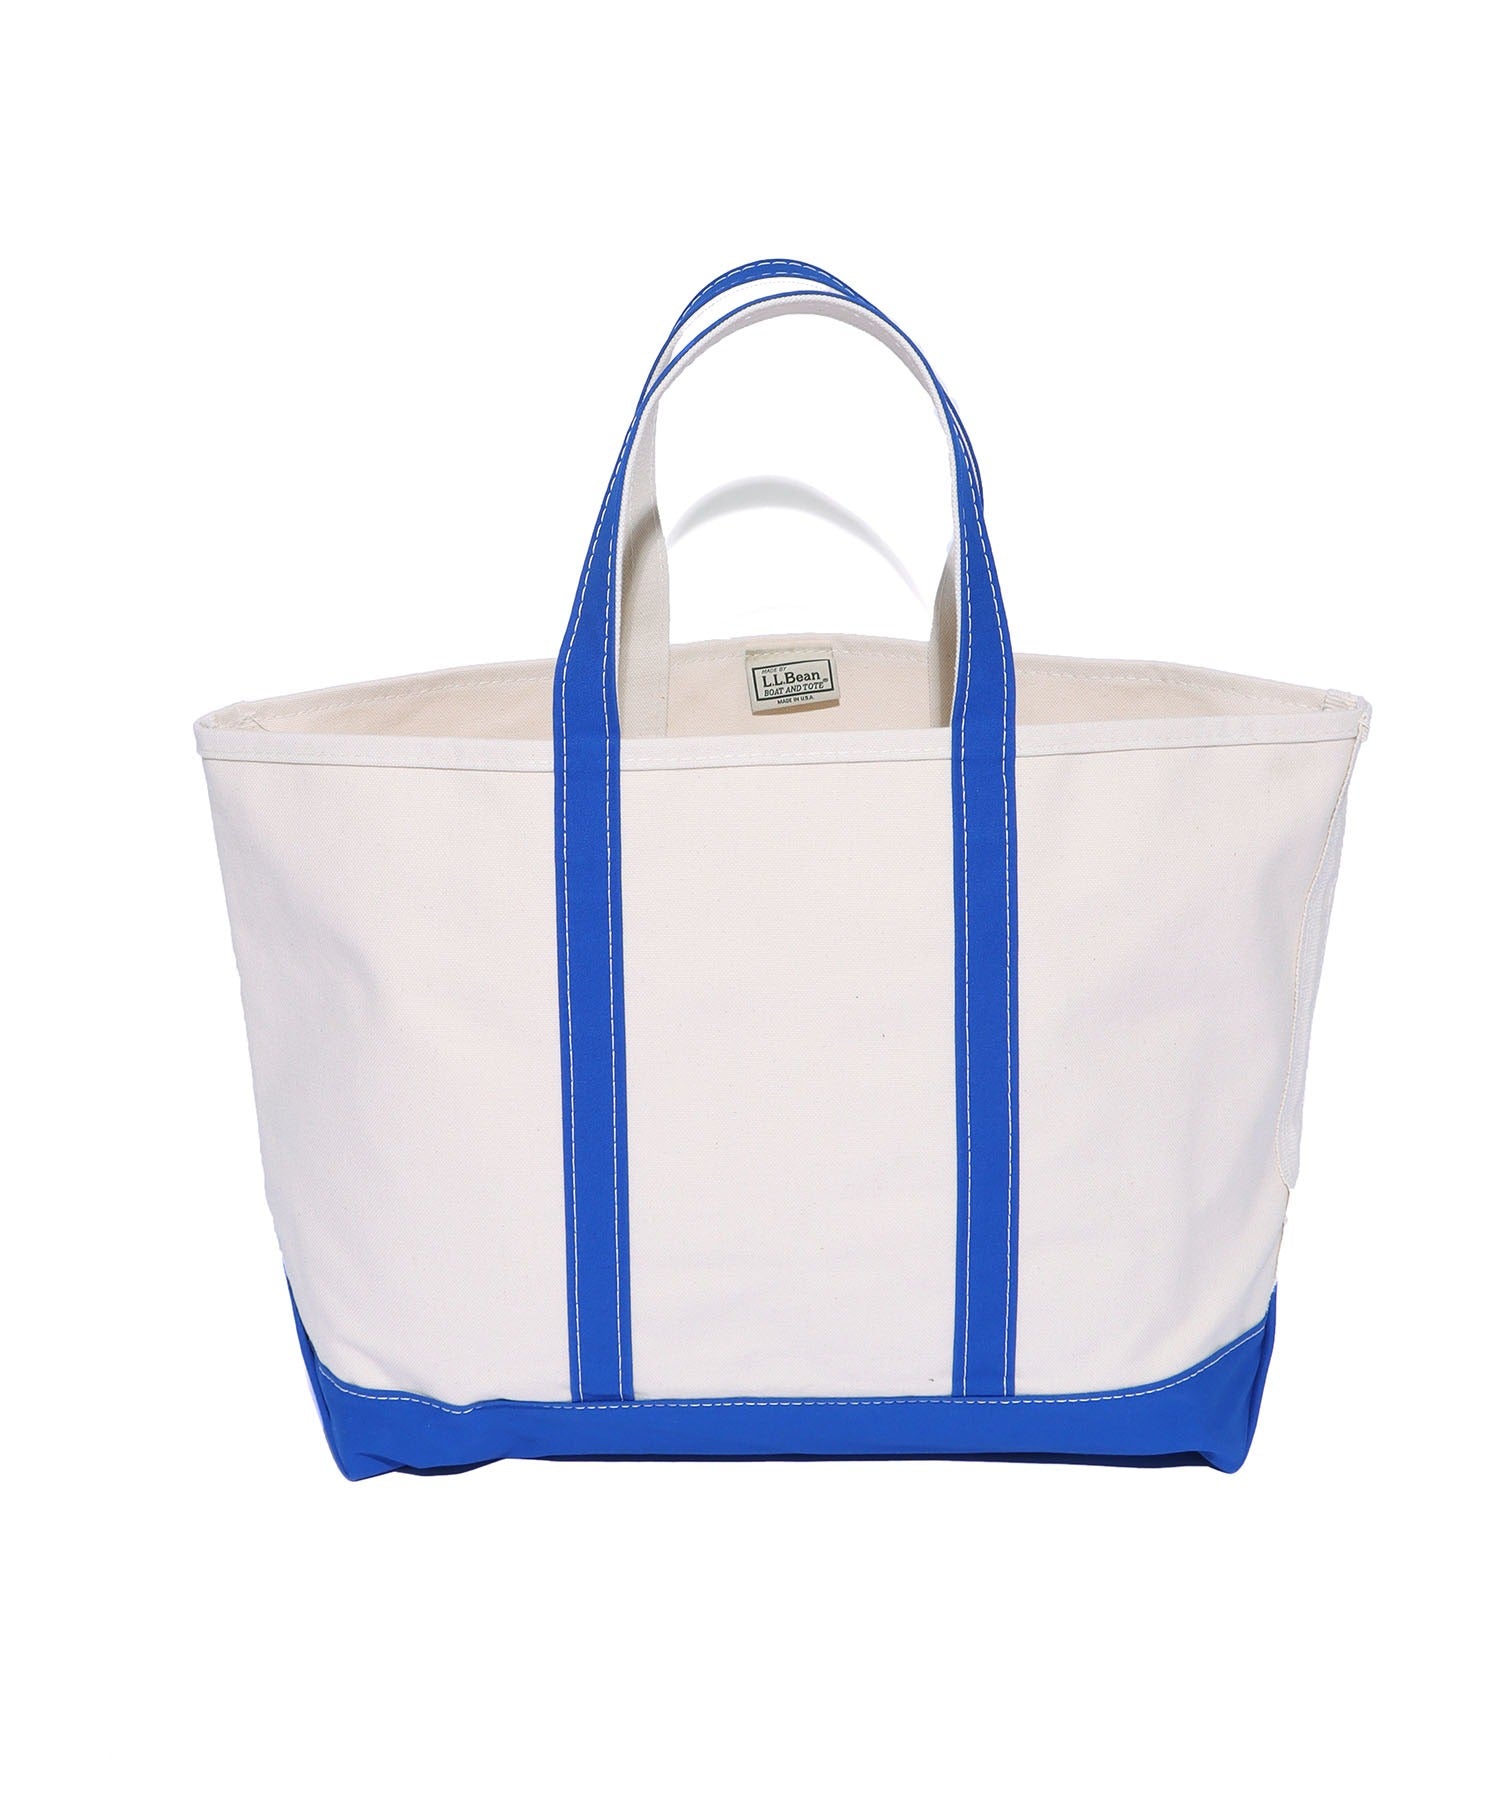 Boat and Tote LARGE